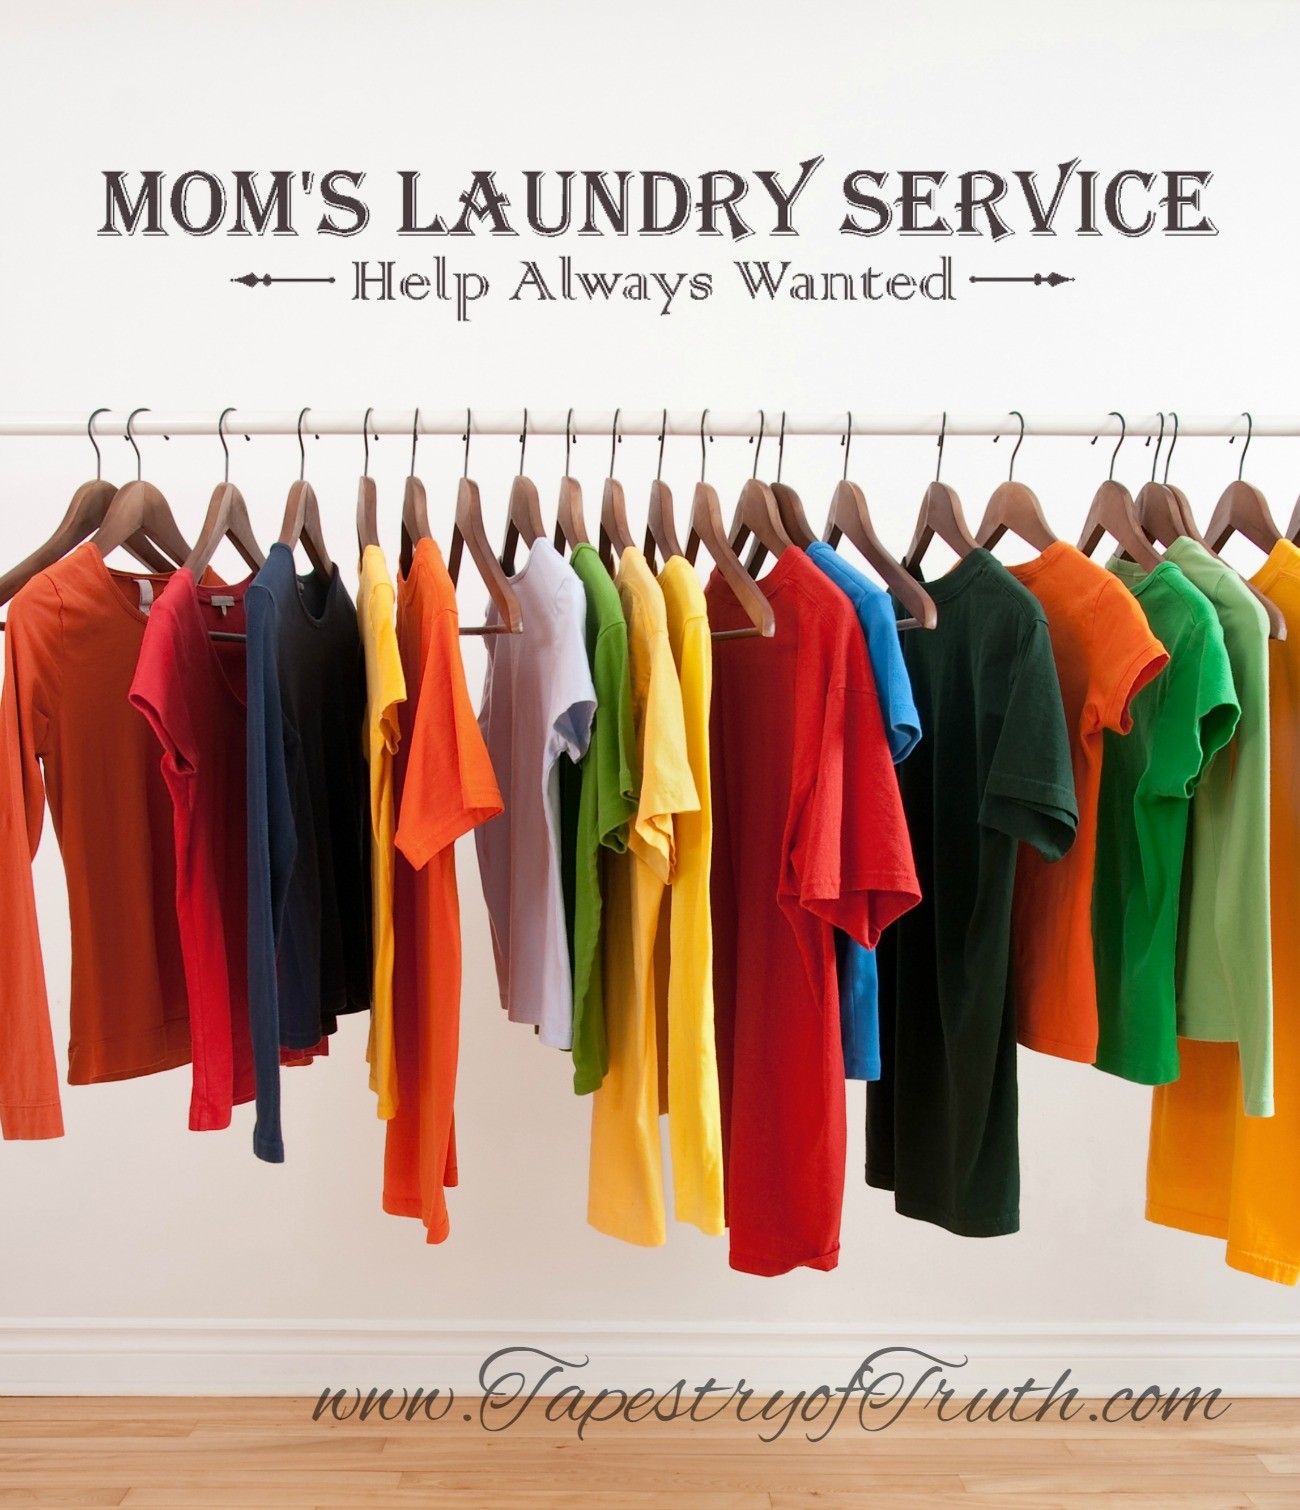 Mom's Laundry Service - Help Always Wanted